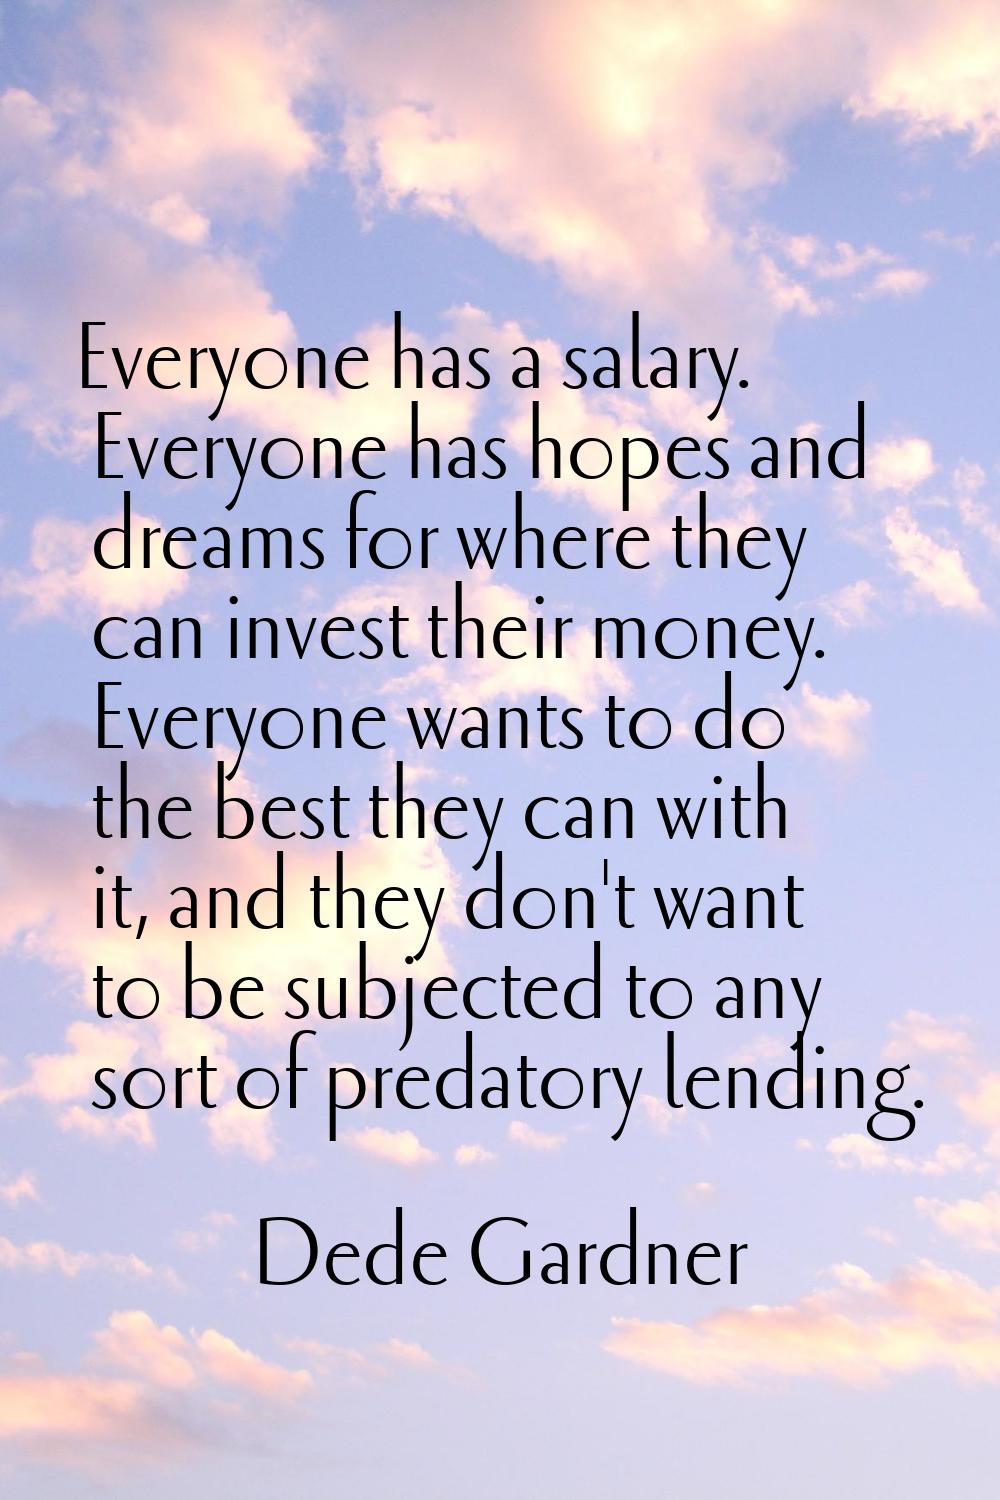 Everyone has a salary. Everyone has hopes and dreams for where they can invest their money. Everyon